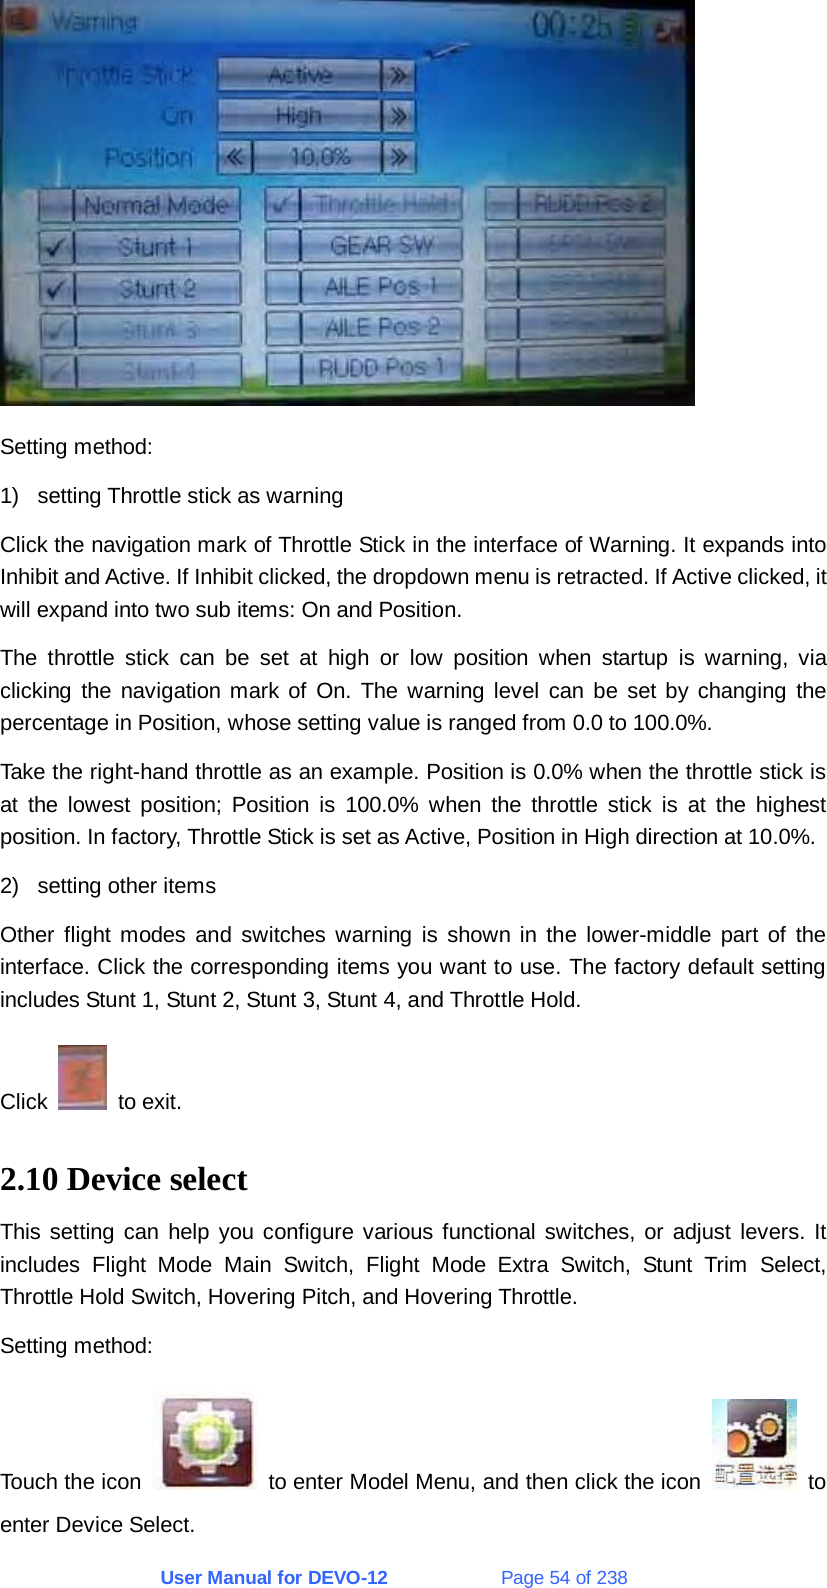 User Manual for DEVO-12             Page 54 of 238  Setting method: 1)  setting Throttle stick as warning Click the navigation mark of Throttle Stick in the interface of Warning. It expands into Inhibit and Active. If Inhibit clicked, the dropdown menu is retracted. If Active clicked, it will expand into two sub items: On and Position.   The throttle stick can be set at high or low position when startup is warning, via clicking the navigation mark of On. The warning level can be set by changing the percentage in Position, whose setting value is ranged from 0.0 to 100.0%. Take the right-hand throttle as an example. Position is 0.0% when the throttle stick is at the lowest position; Position is 100.0% when the throttle stick is at the highest position. In factory, Throttle Stick is set as Active, Position in High direction at 10.0%. 2)  setting other items Other flight modes and switches warning is shown in the lower-middle part of the interface. Click the corresponding items you want to use. The factory default setting includes Stunt 1, Stunt 2, Stunt 3, Stunt 4, and Throttle Hold. Click   to exit. 2.10 Device select This setting can help you configure various functional switches, or adjust levers. It includes Flight Mode Main Switch, Flight Mode Extra Switch, Stunt Trim Select, Throttle Hold Switch, Hovering Pitch, and Hovering Throttle. Setting method: Touch the icon    to enter Model Menu, and then click the icon   to enter Device Select. 